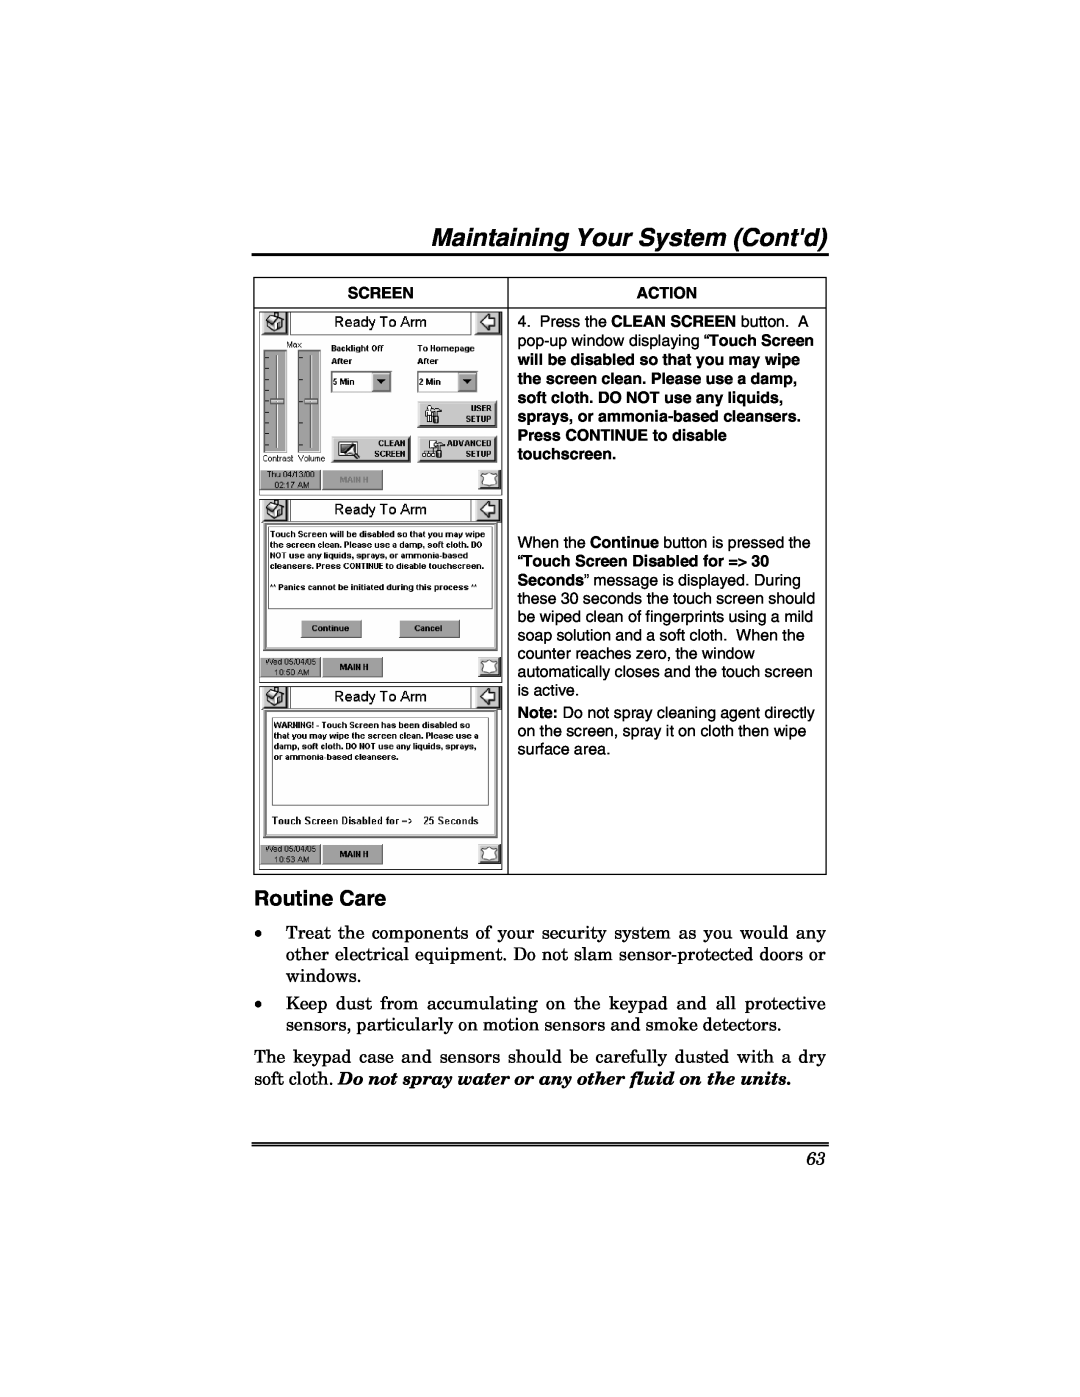 Honeywell 6271V manual Maintaining Your System Contd, Routine Care 